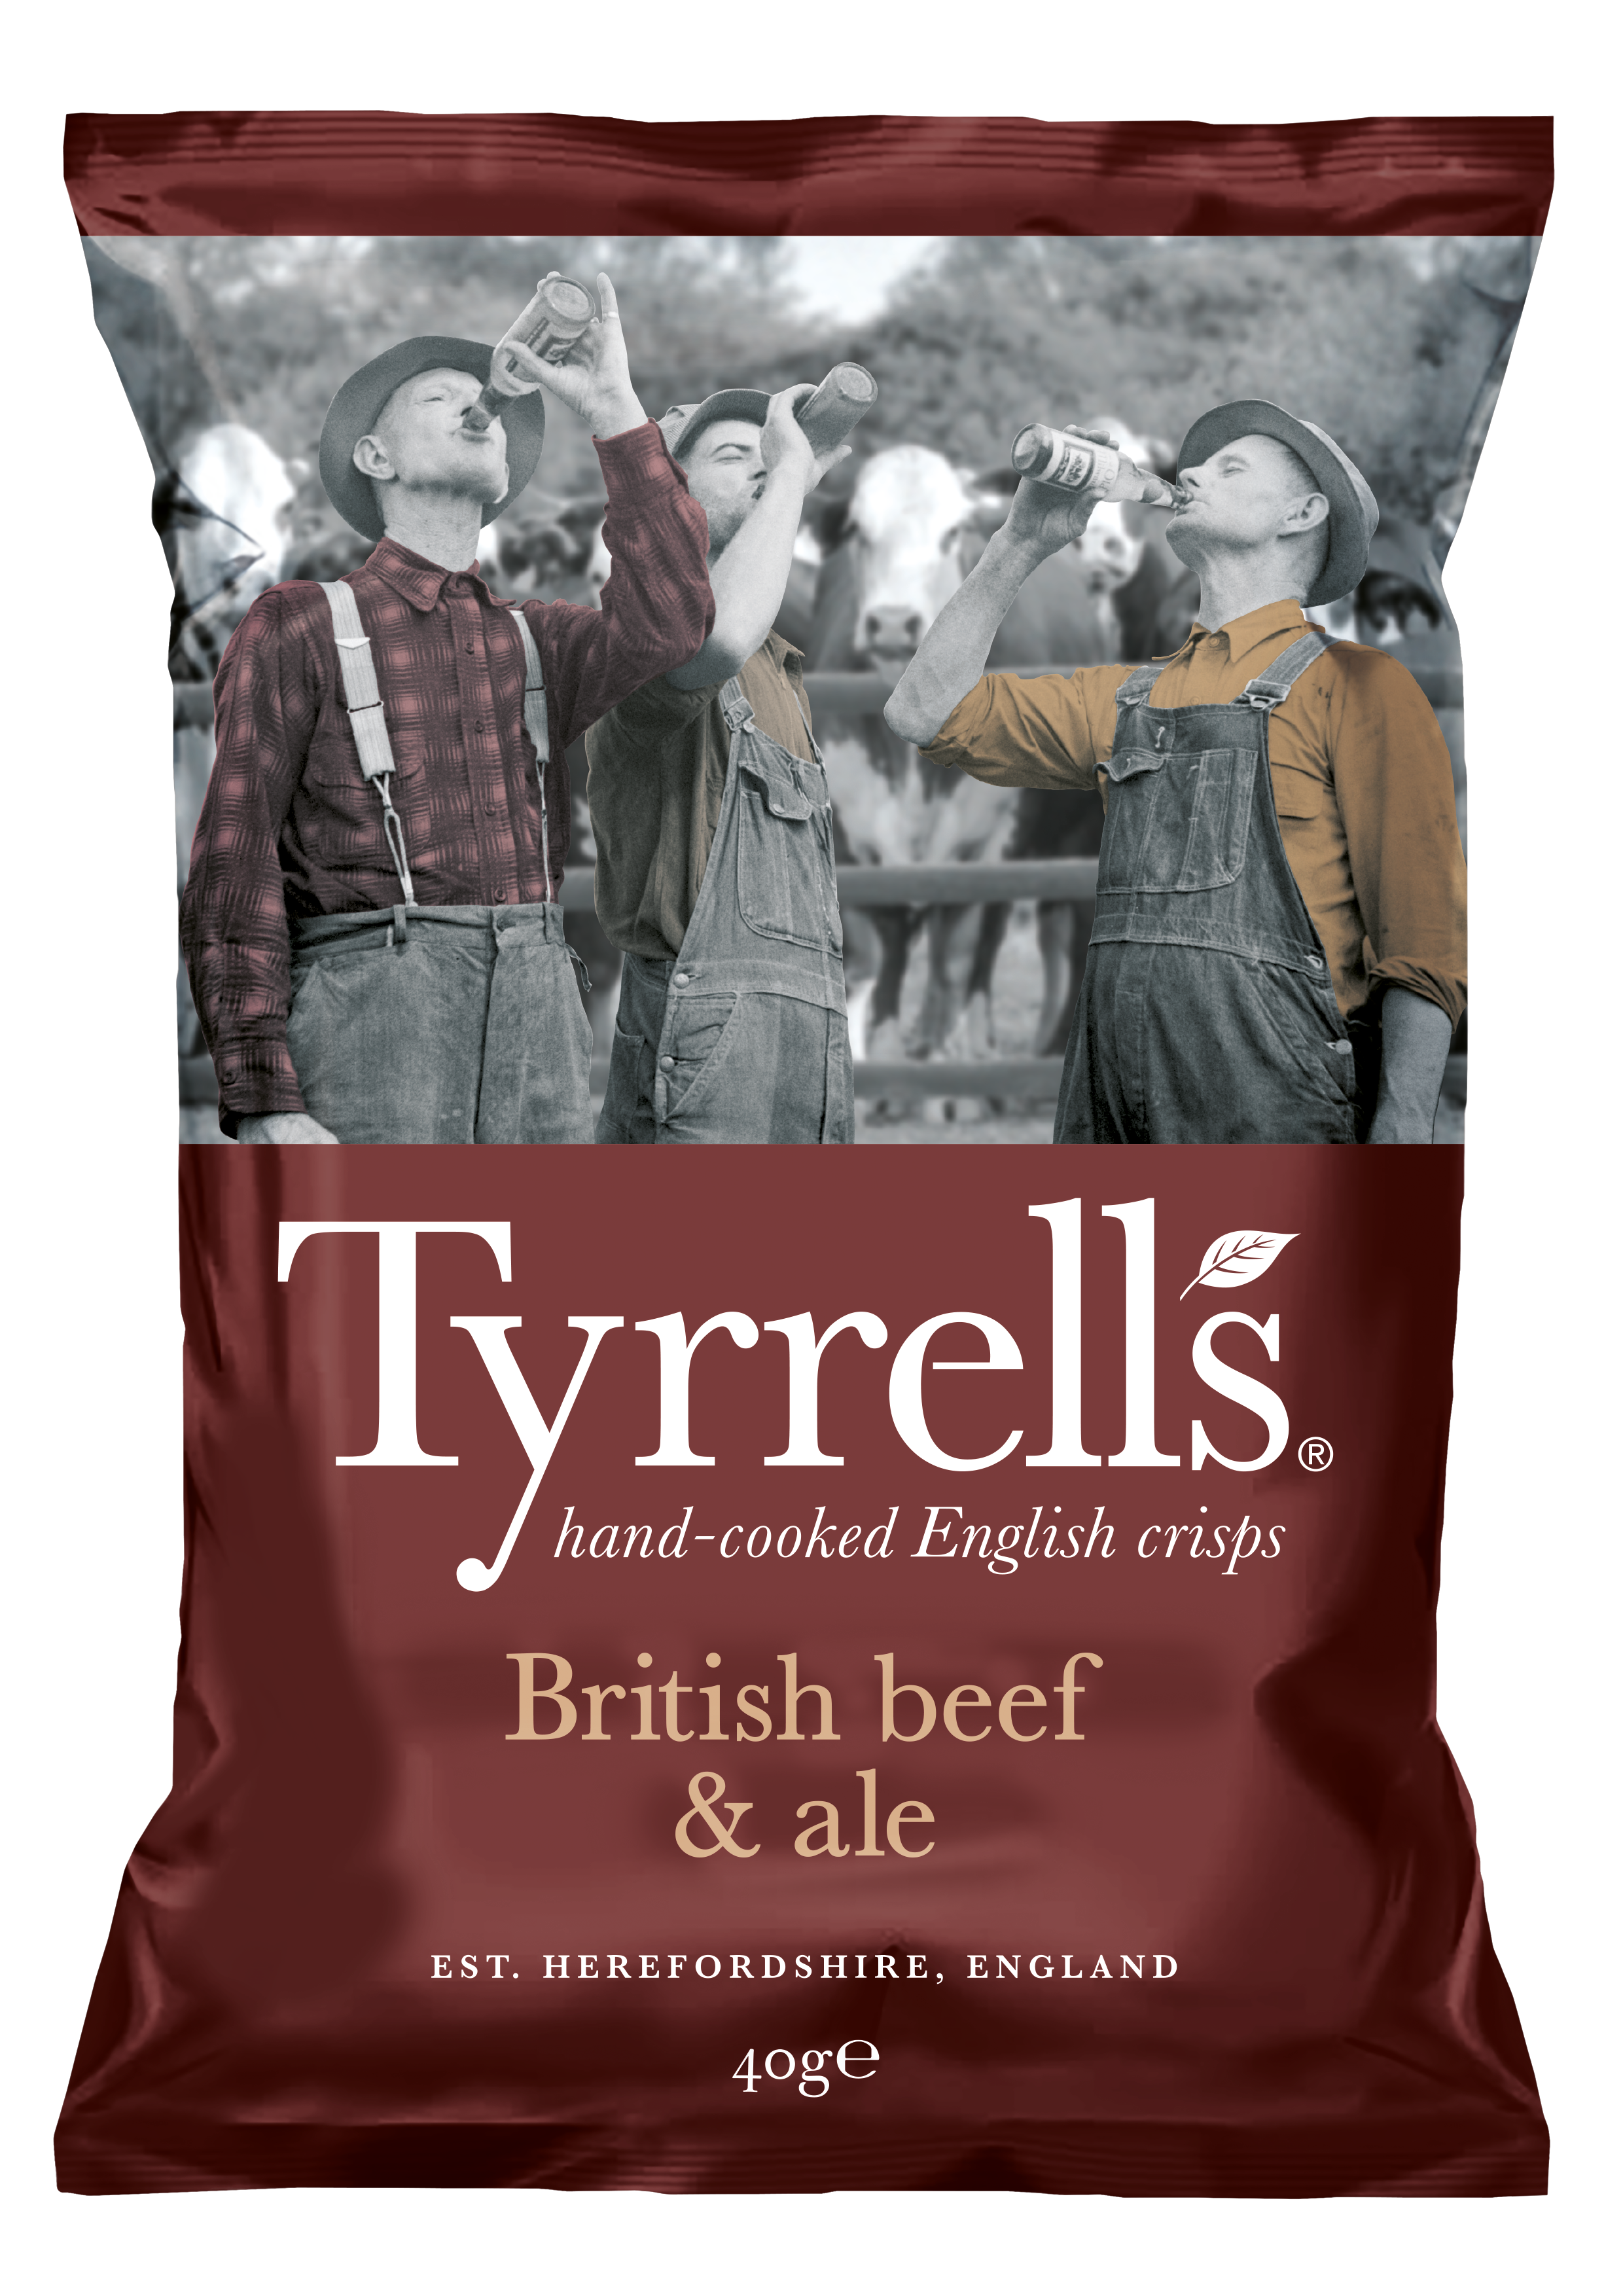 Tyrells launch new ‘Tyrellbly Tasty’ British Beef and Ale Flavour